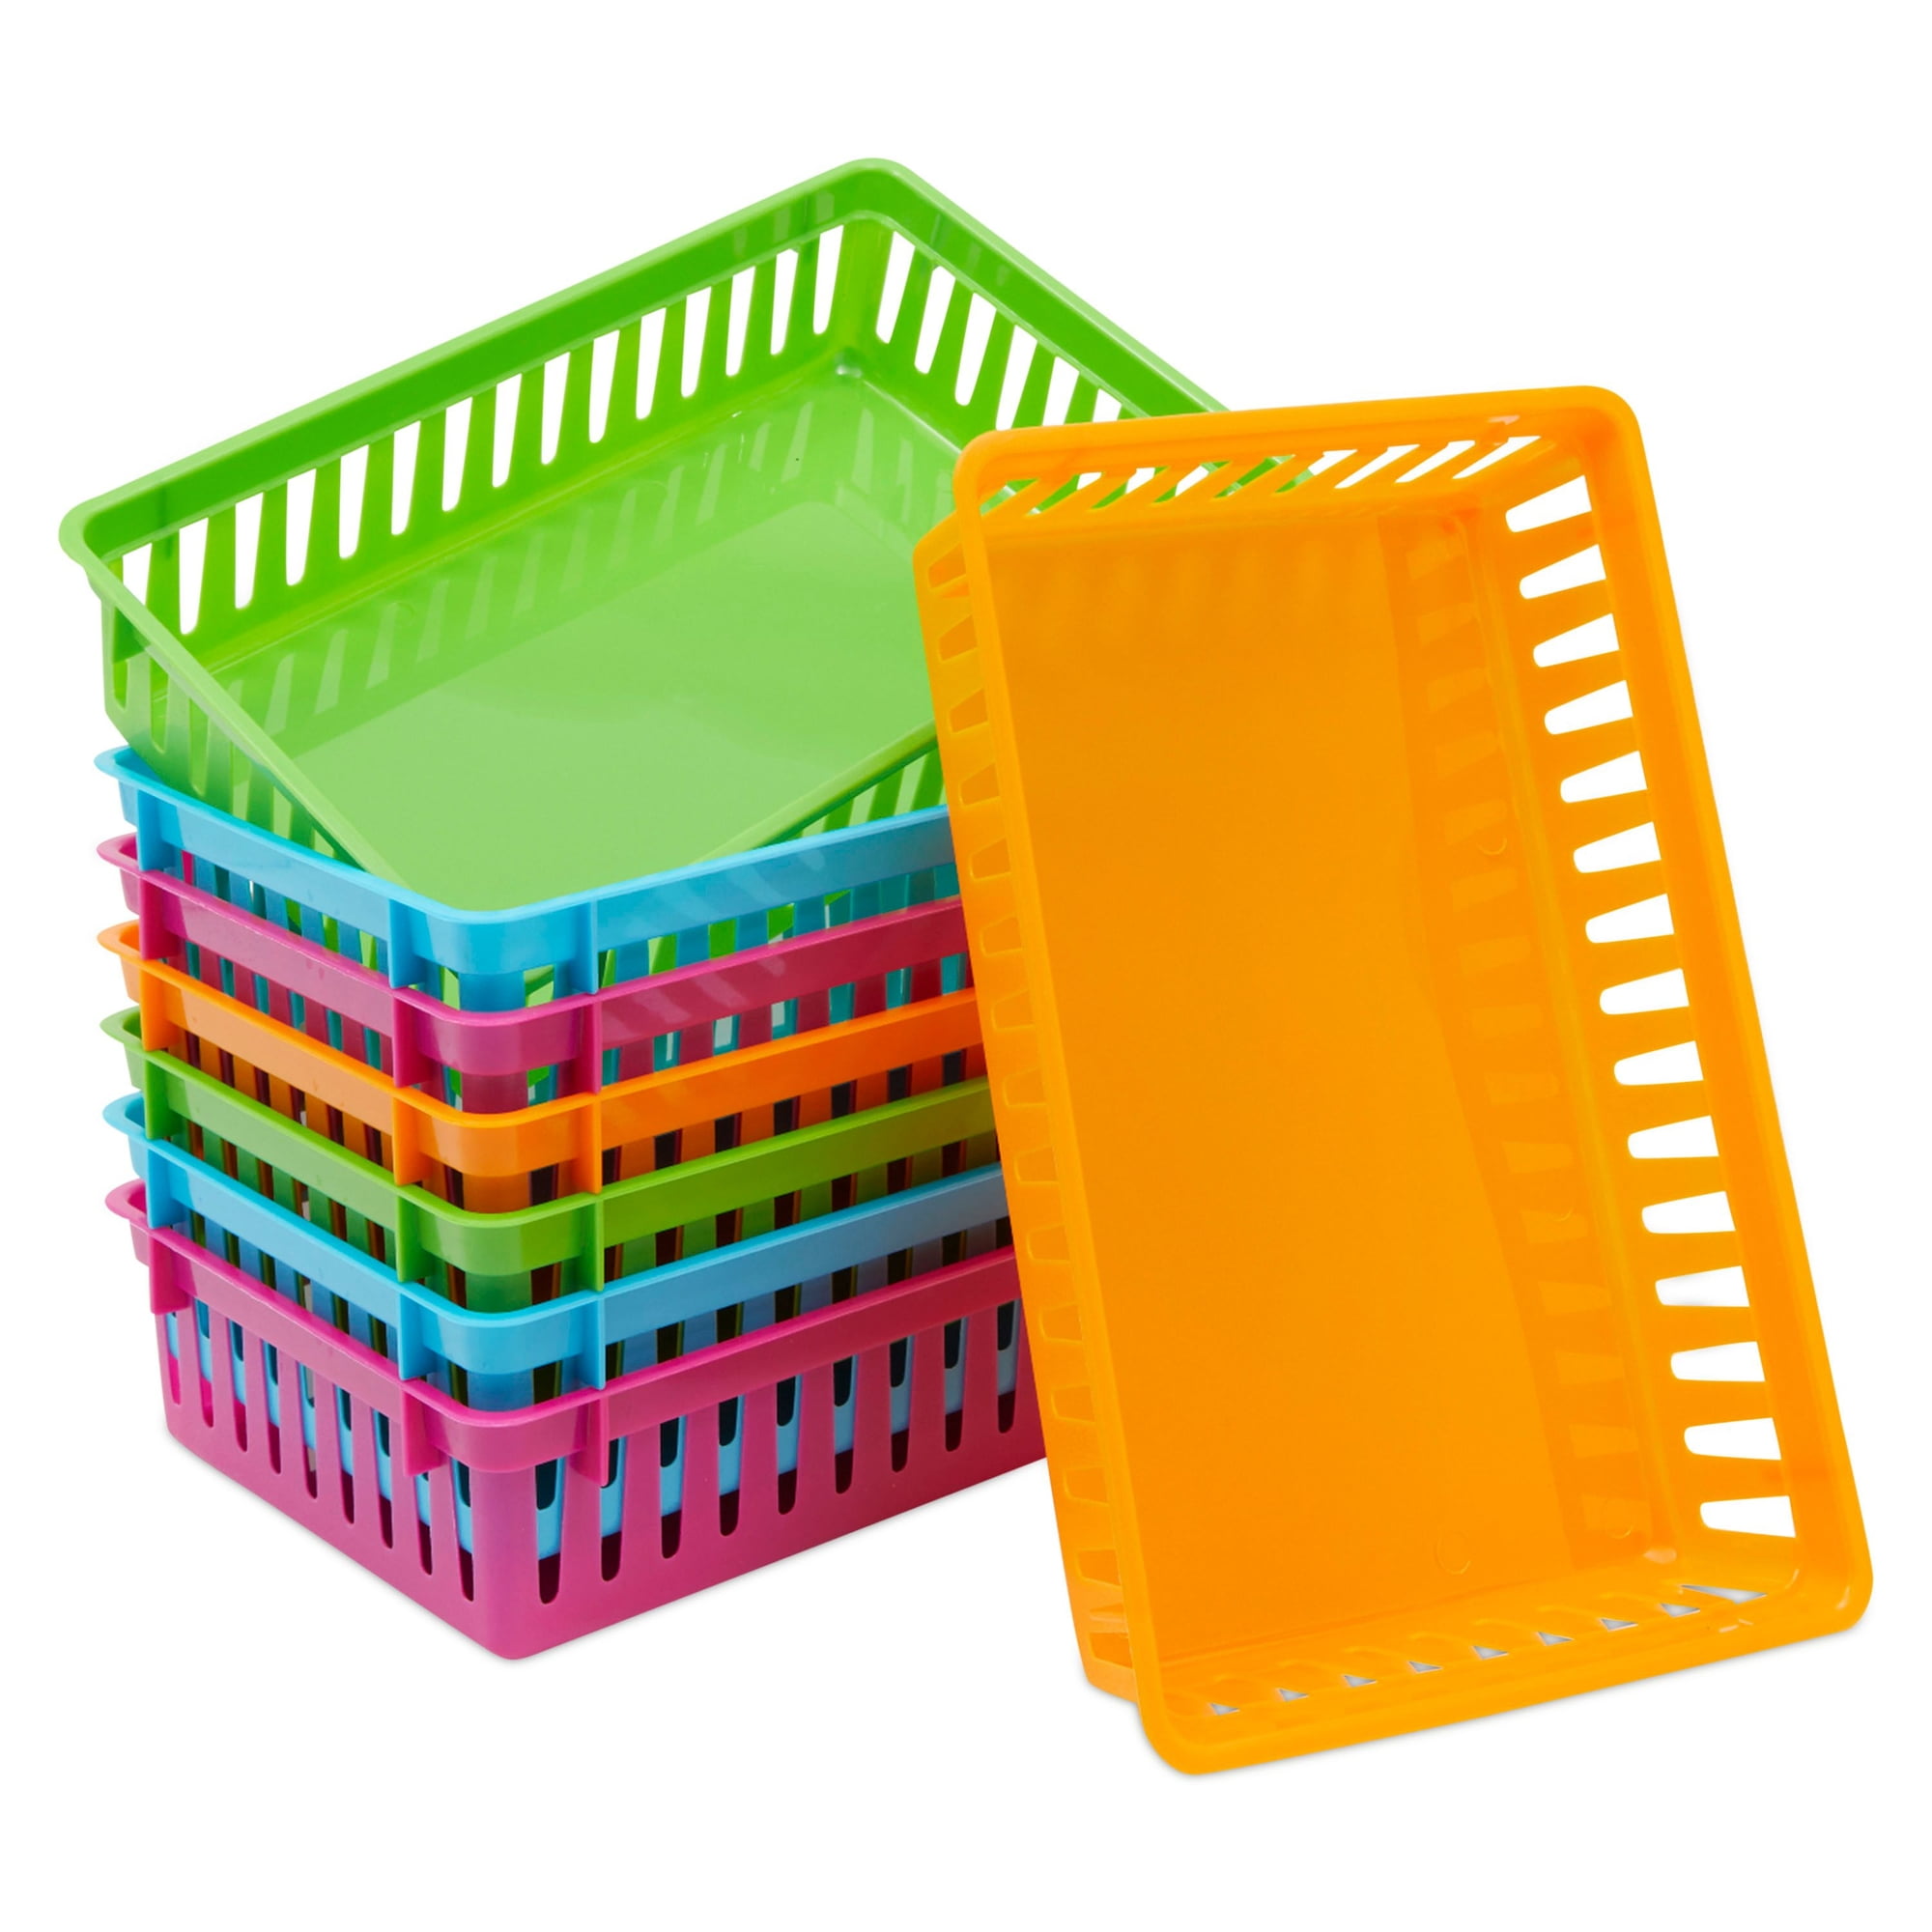 12-Pack Colorful Small Storage Baskets Plastic Bins for Organizing Shelves  and Desks, Arts and Crafts Containers for Home, School, Office (4 Colors,  5.3 x 5.3 x 2.4 in)